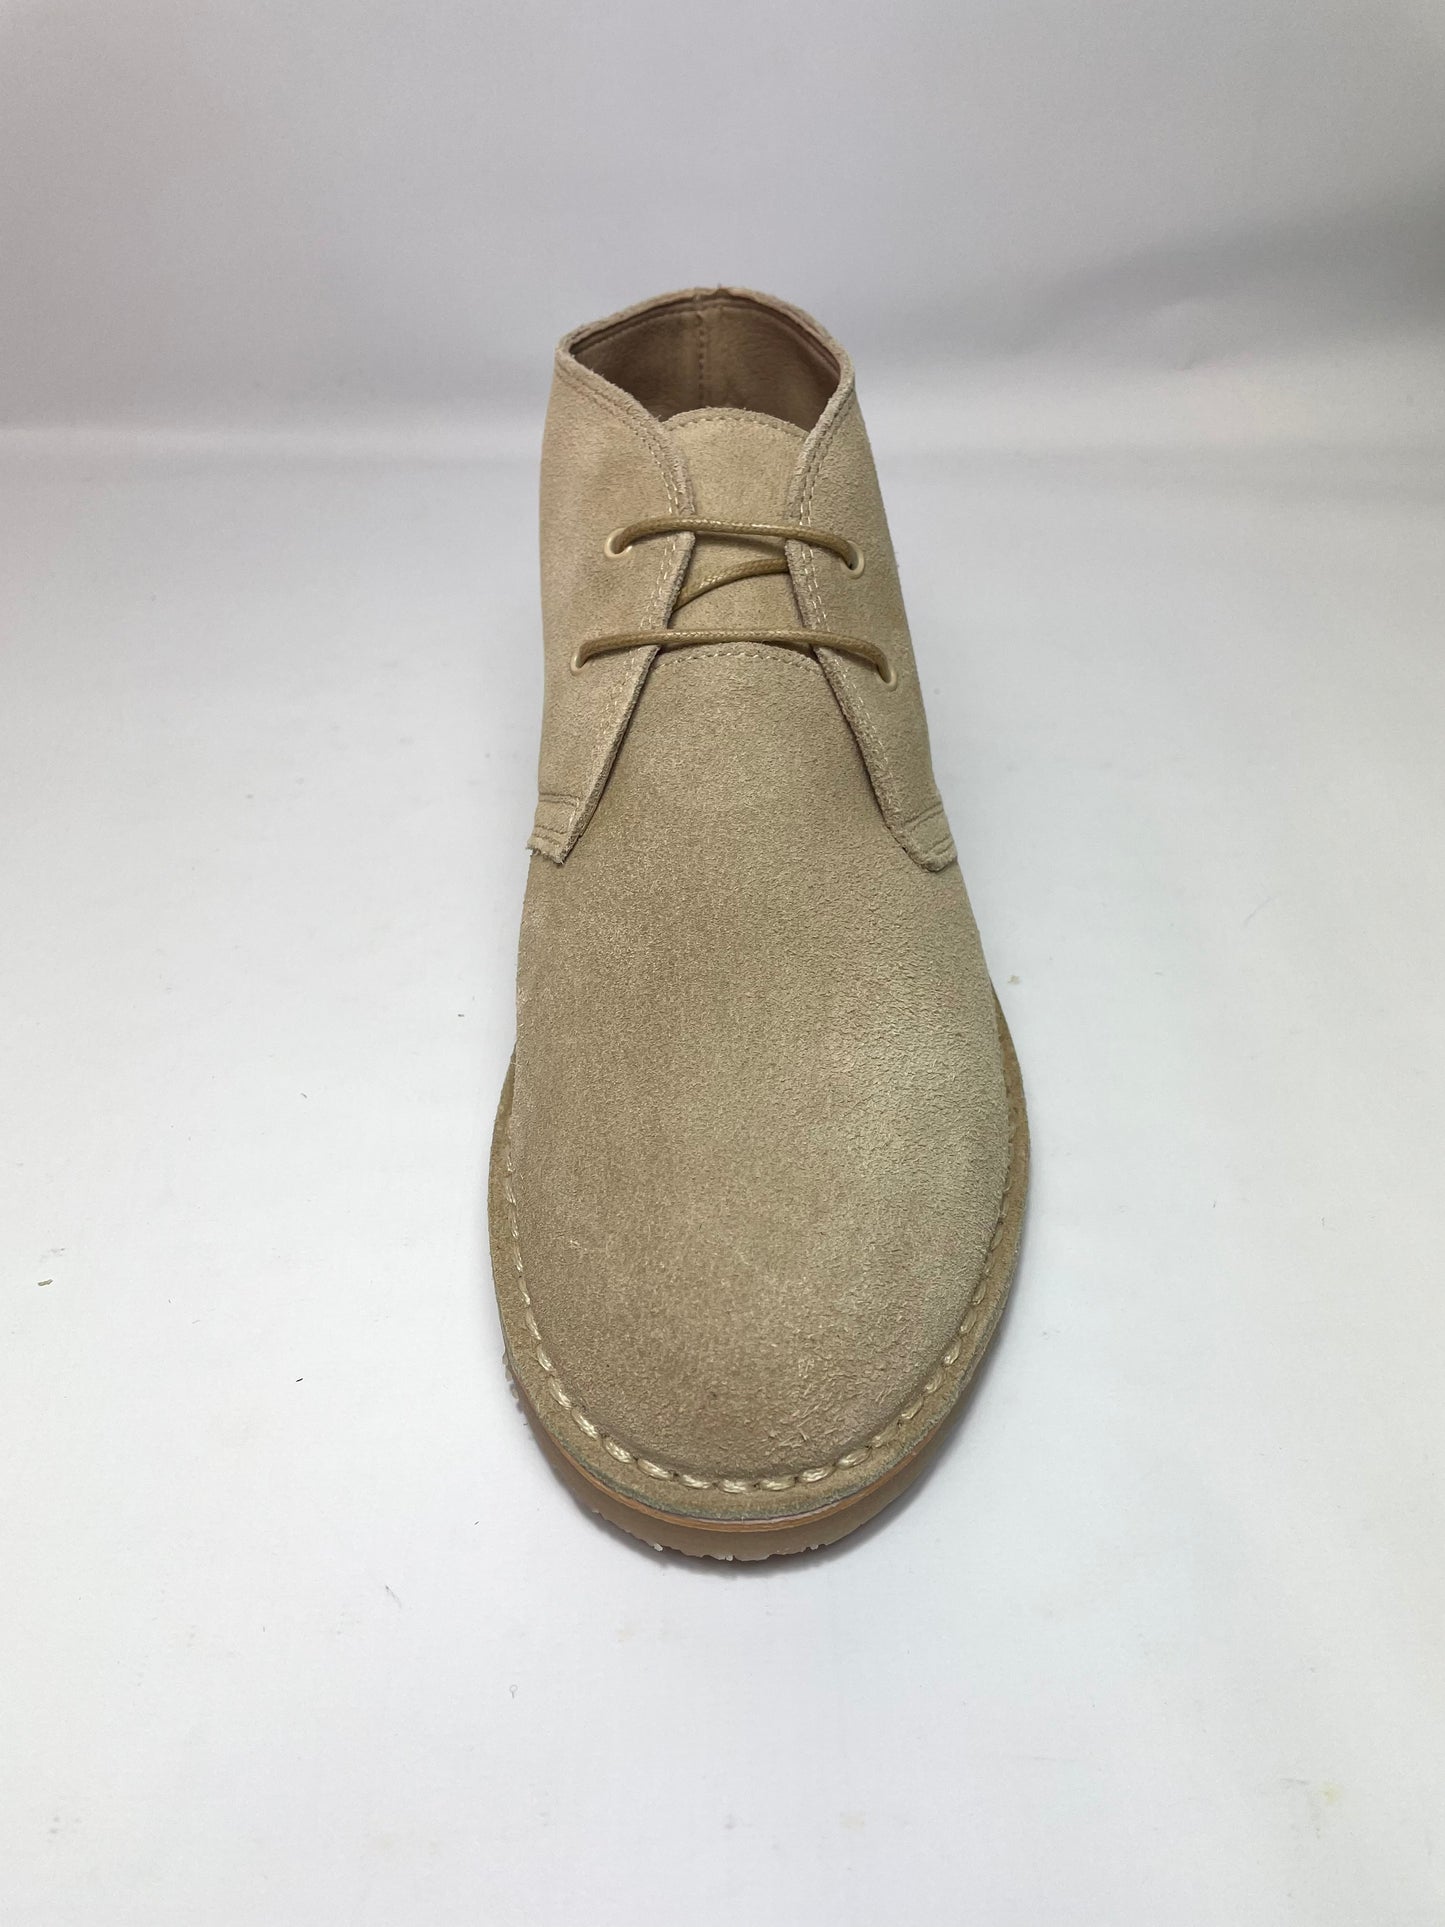 Women's Suede Suede Leather Boots in Khaki UK 8 / EU 41